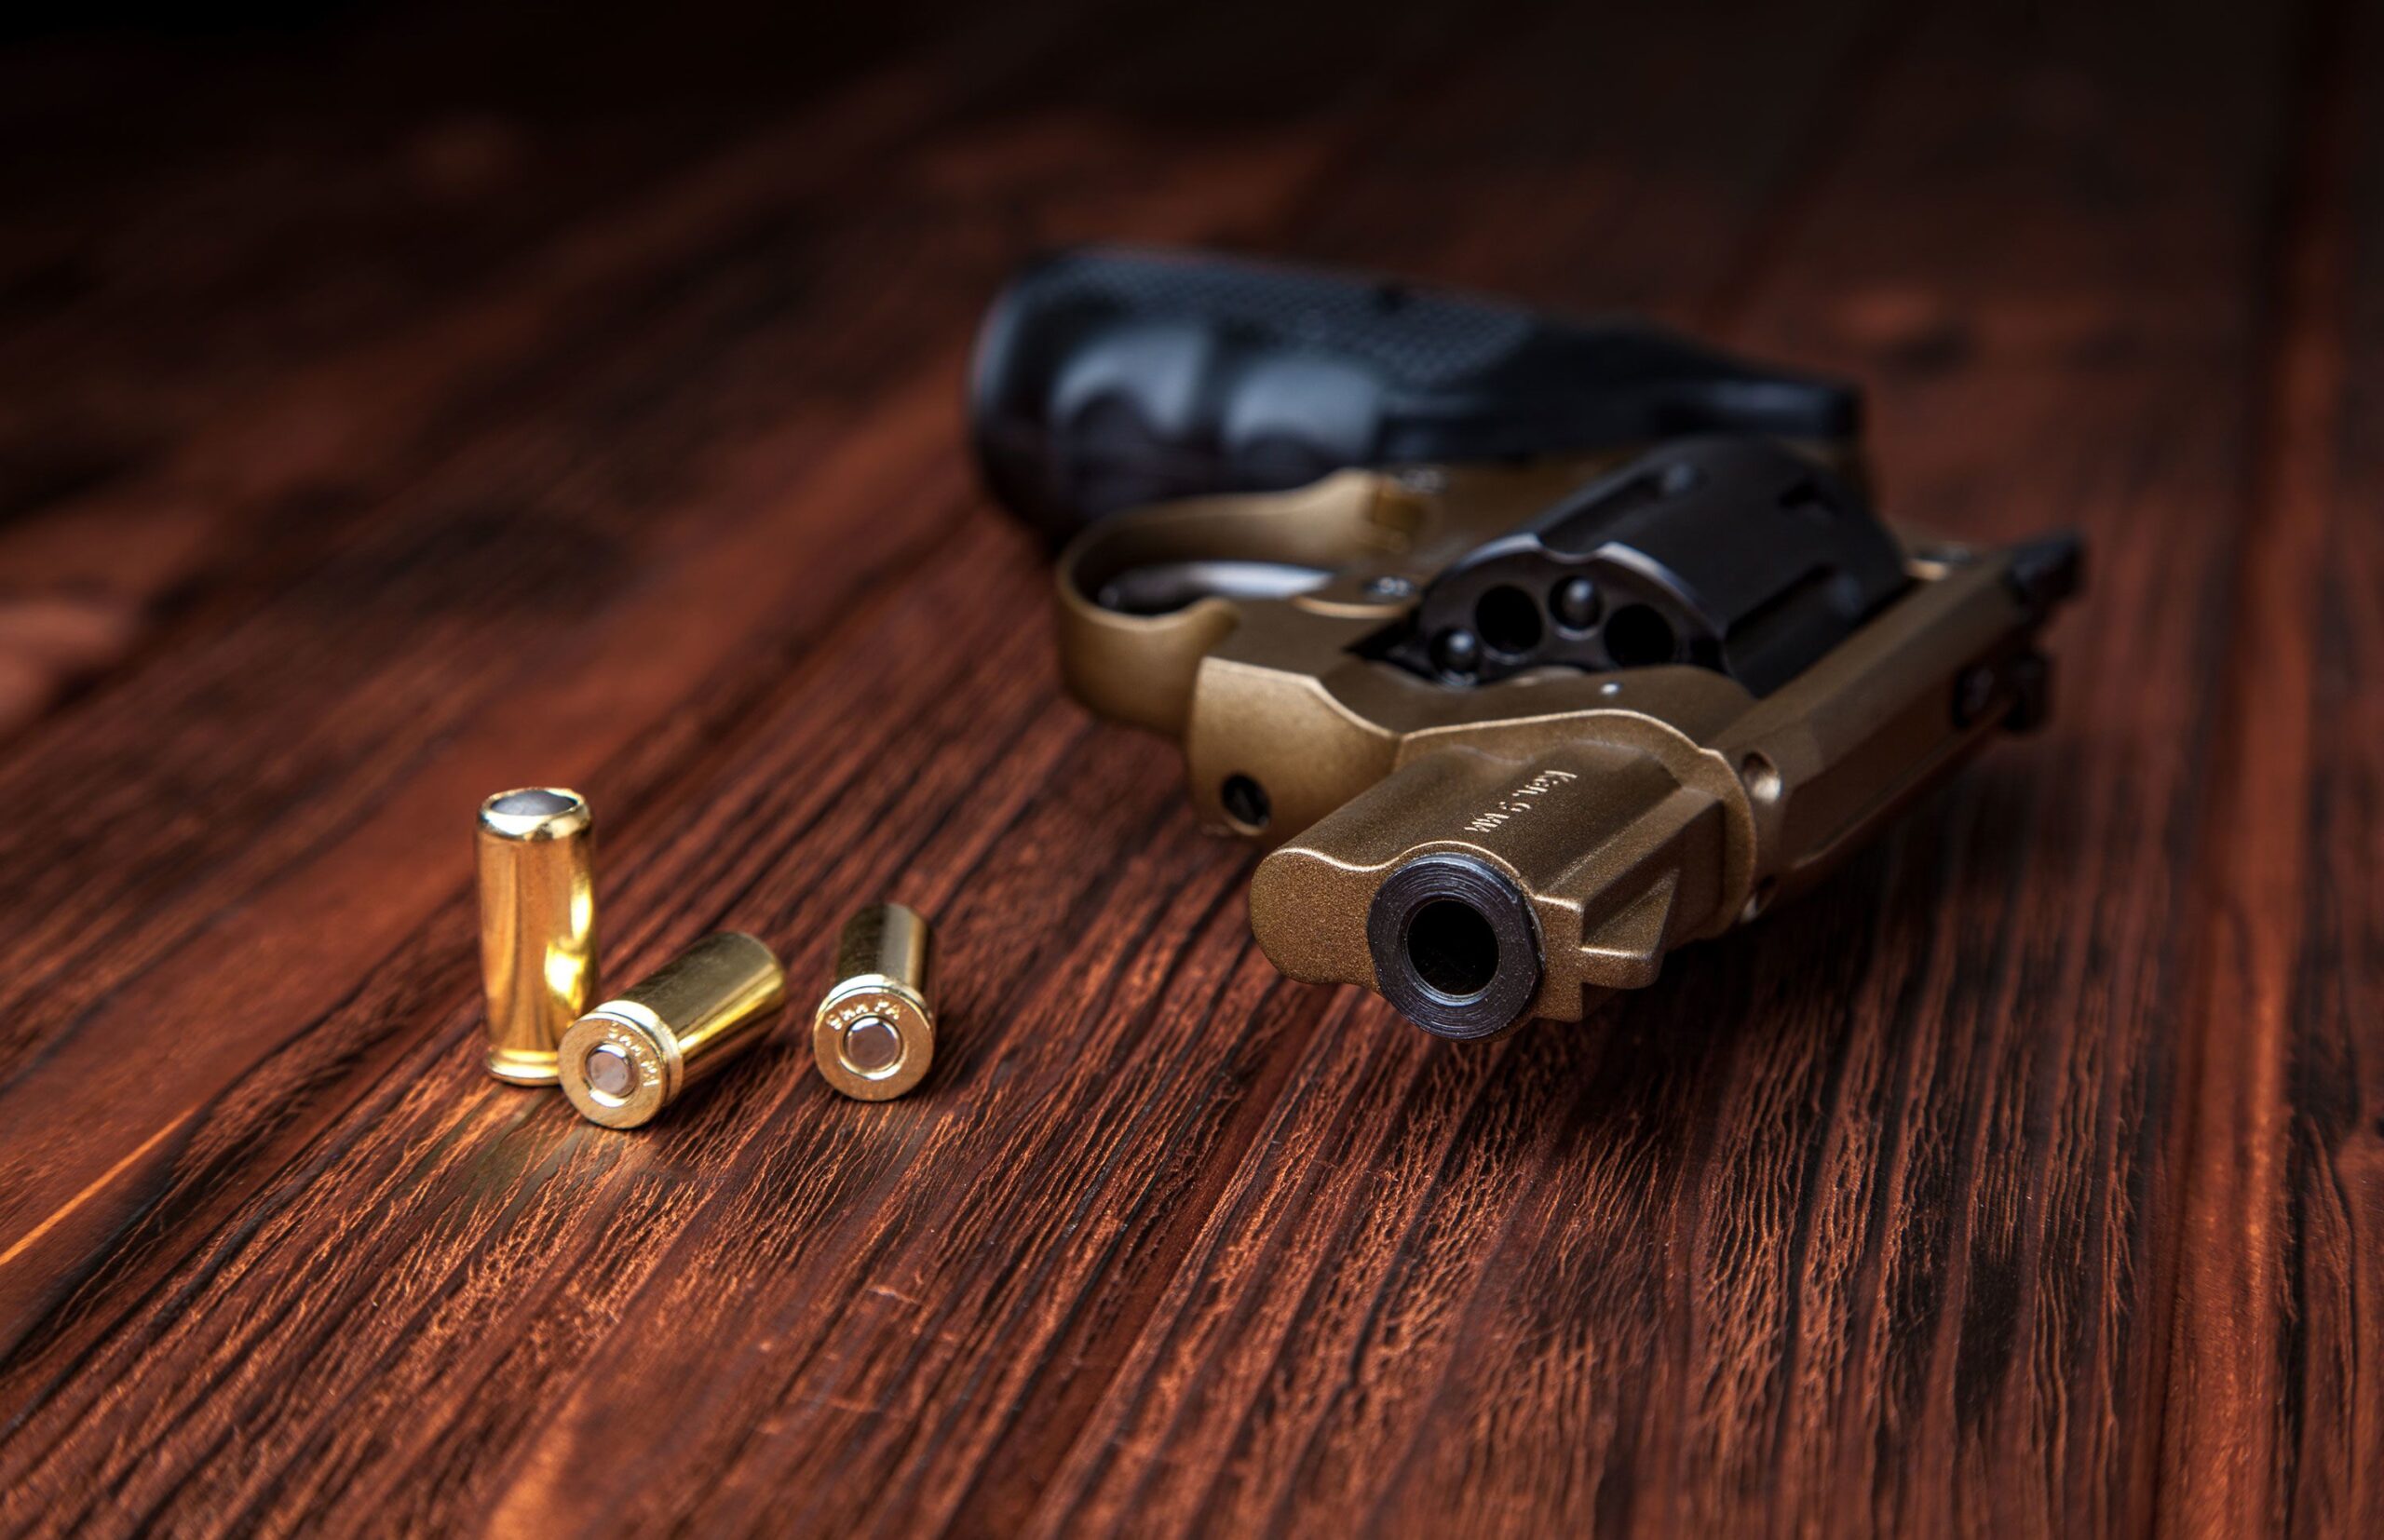 Firearms have been the leading cause of death among children since 2020.
(Credit: SolidMaks/iStockp...